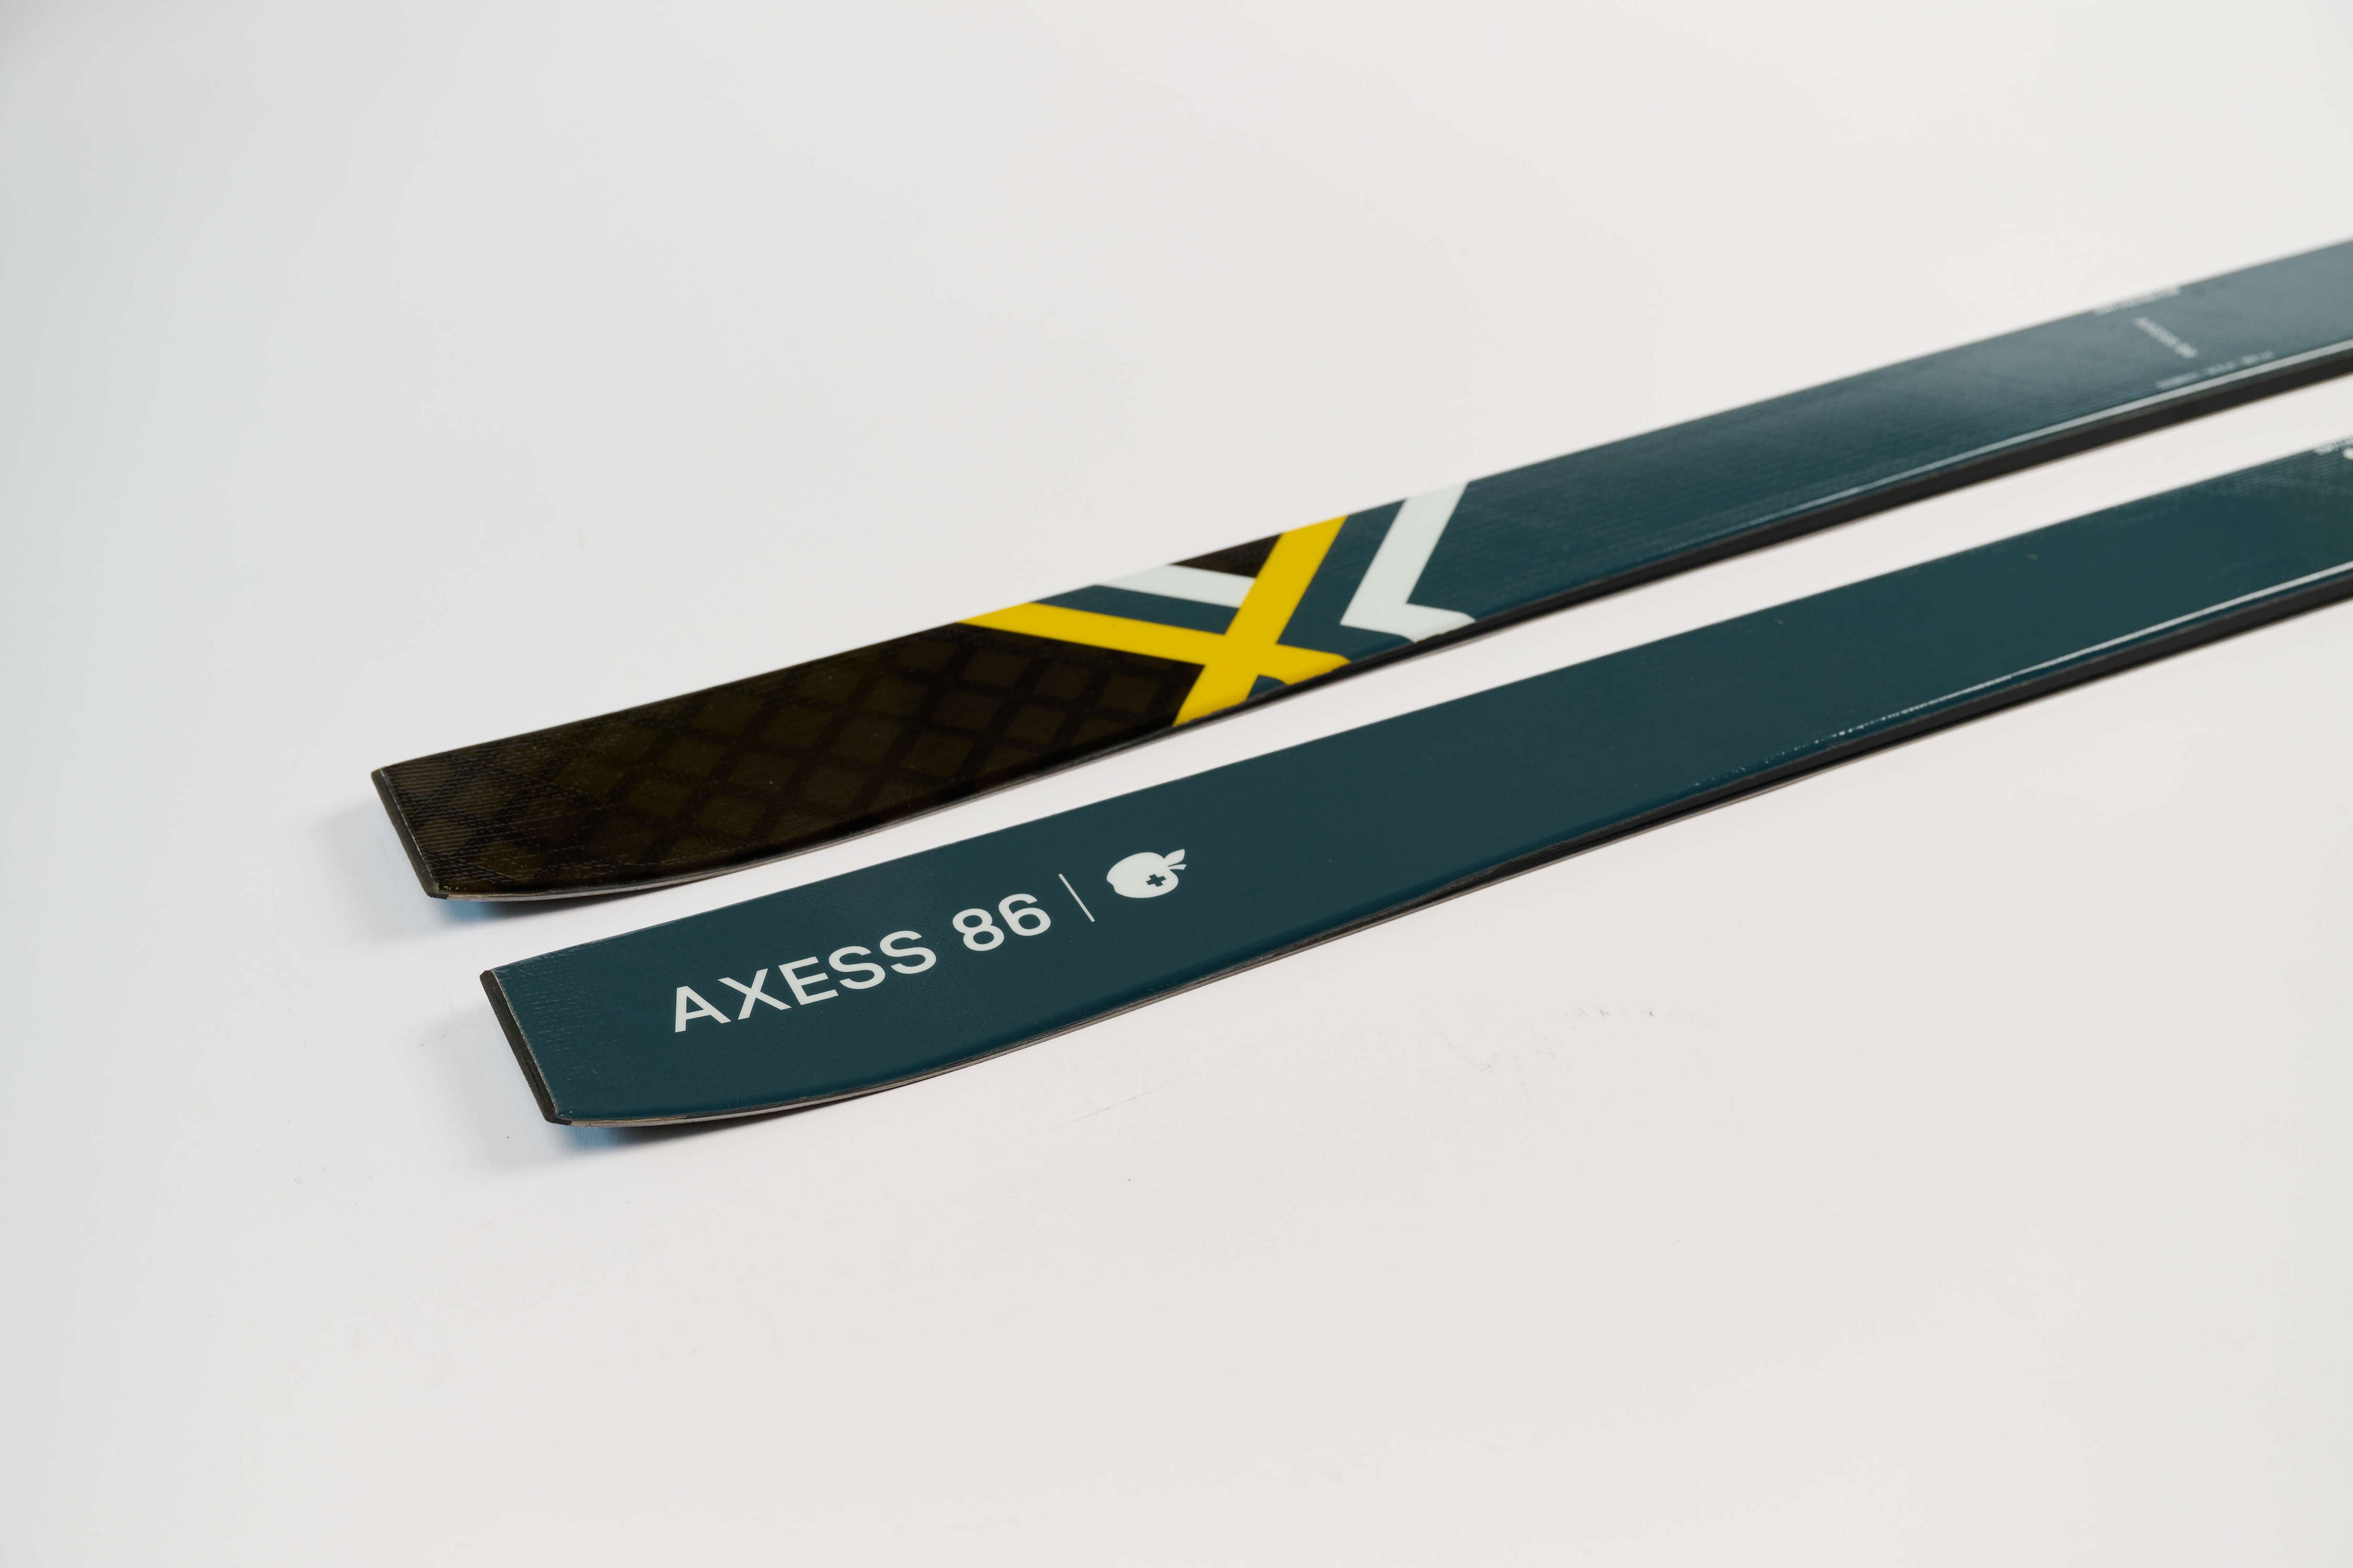 Elevate your skiing journey with Movement's Axess 86 skis.